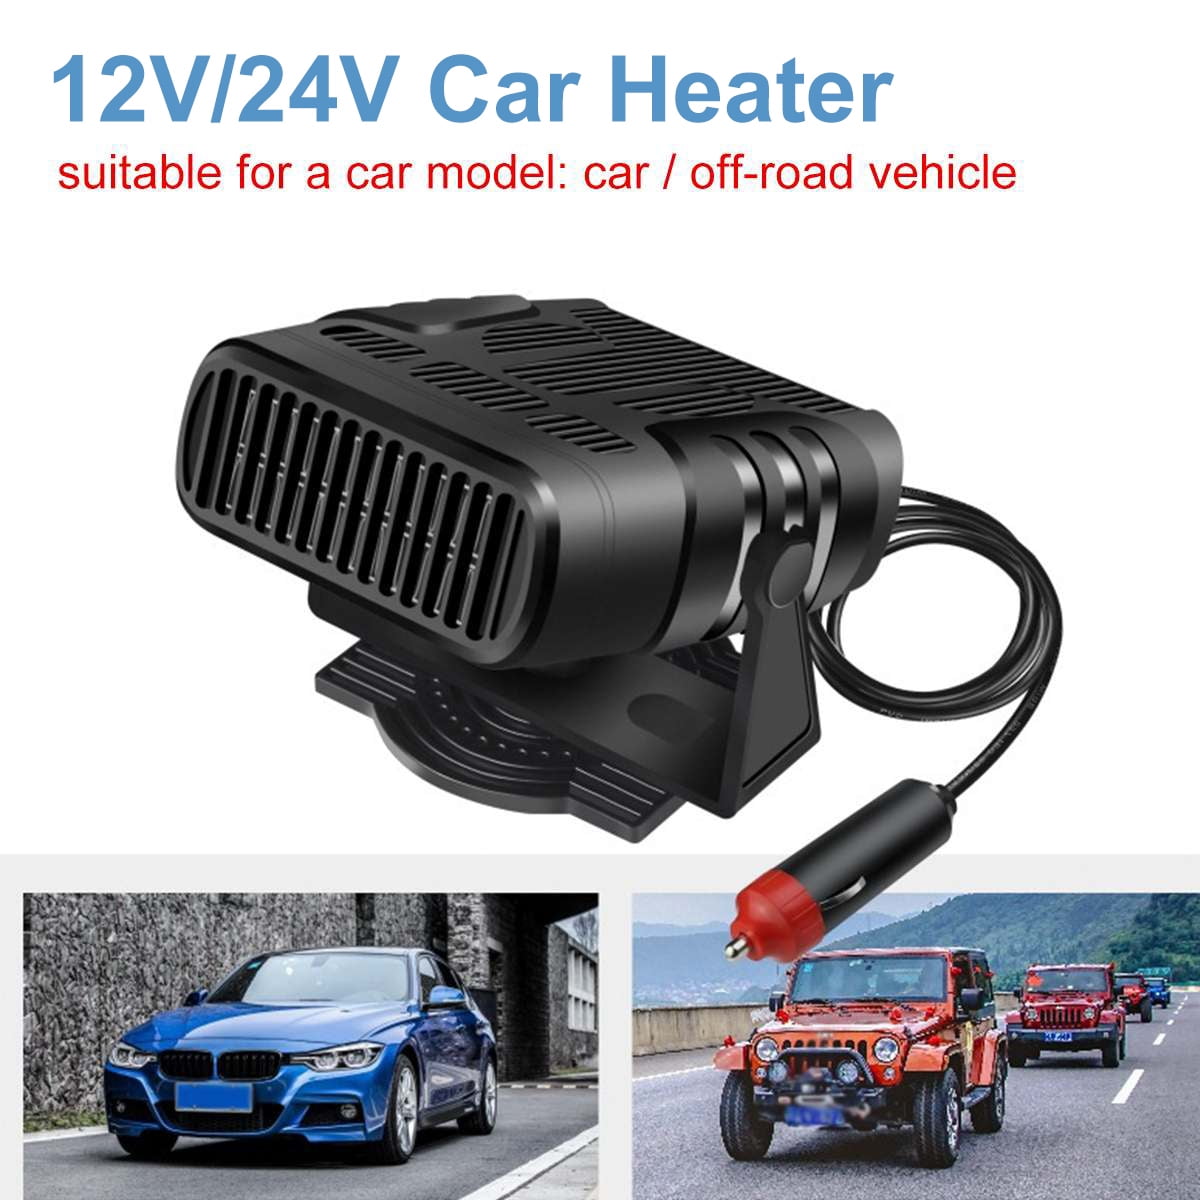 12V 150W Portable Powerful Car Heater Fan Electric Car Defroster Defroster  HOT